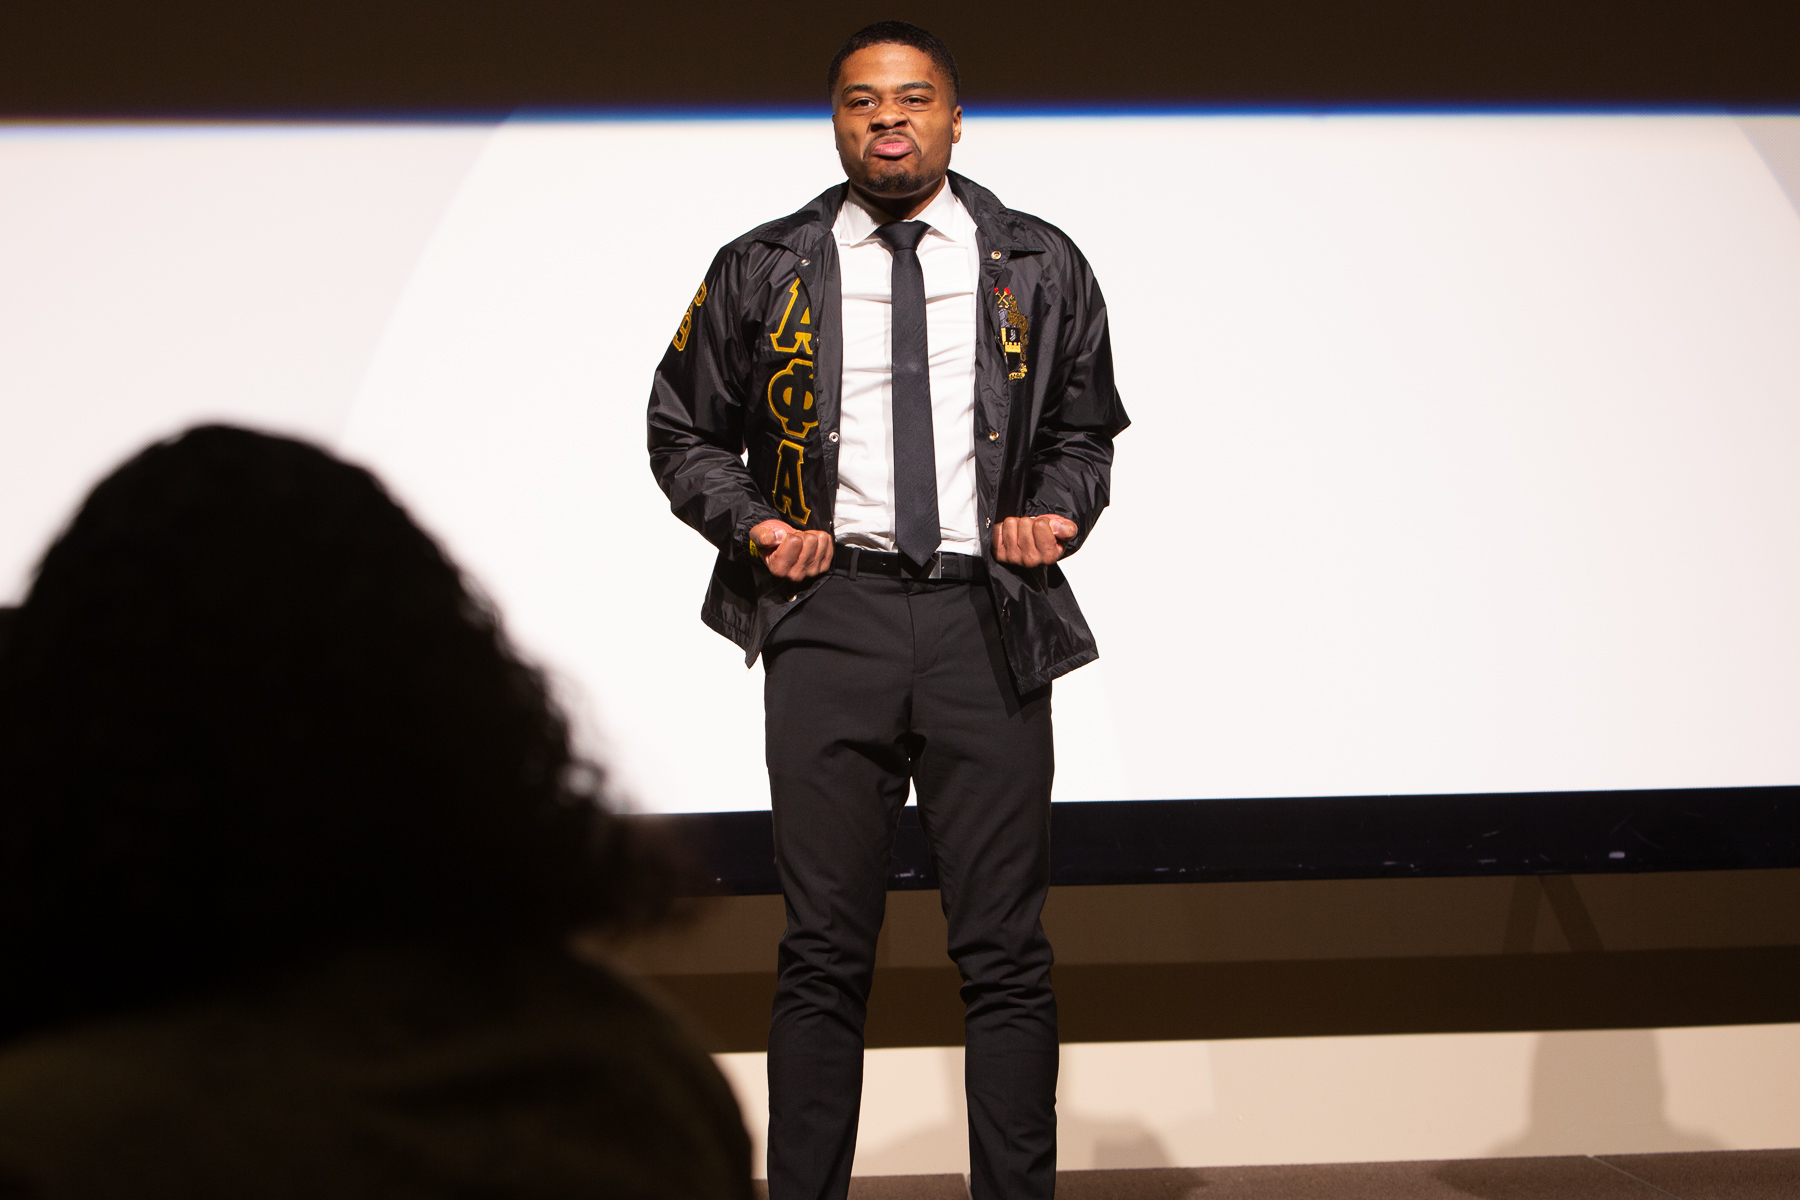 Students in the Alpha Phi Alpha fraternity at DePaul University, performed a step tribute during the breakfast. Dr. King was a member of Alpha Phi Alpha, one of the largest black fraternities in the nation. (DePaul University/Randall Spriggs)